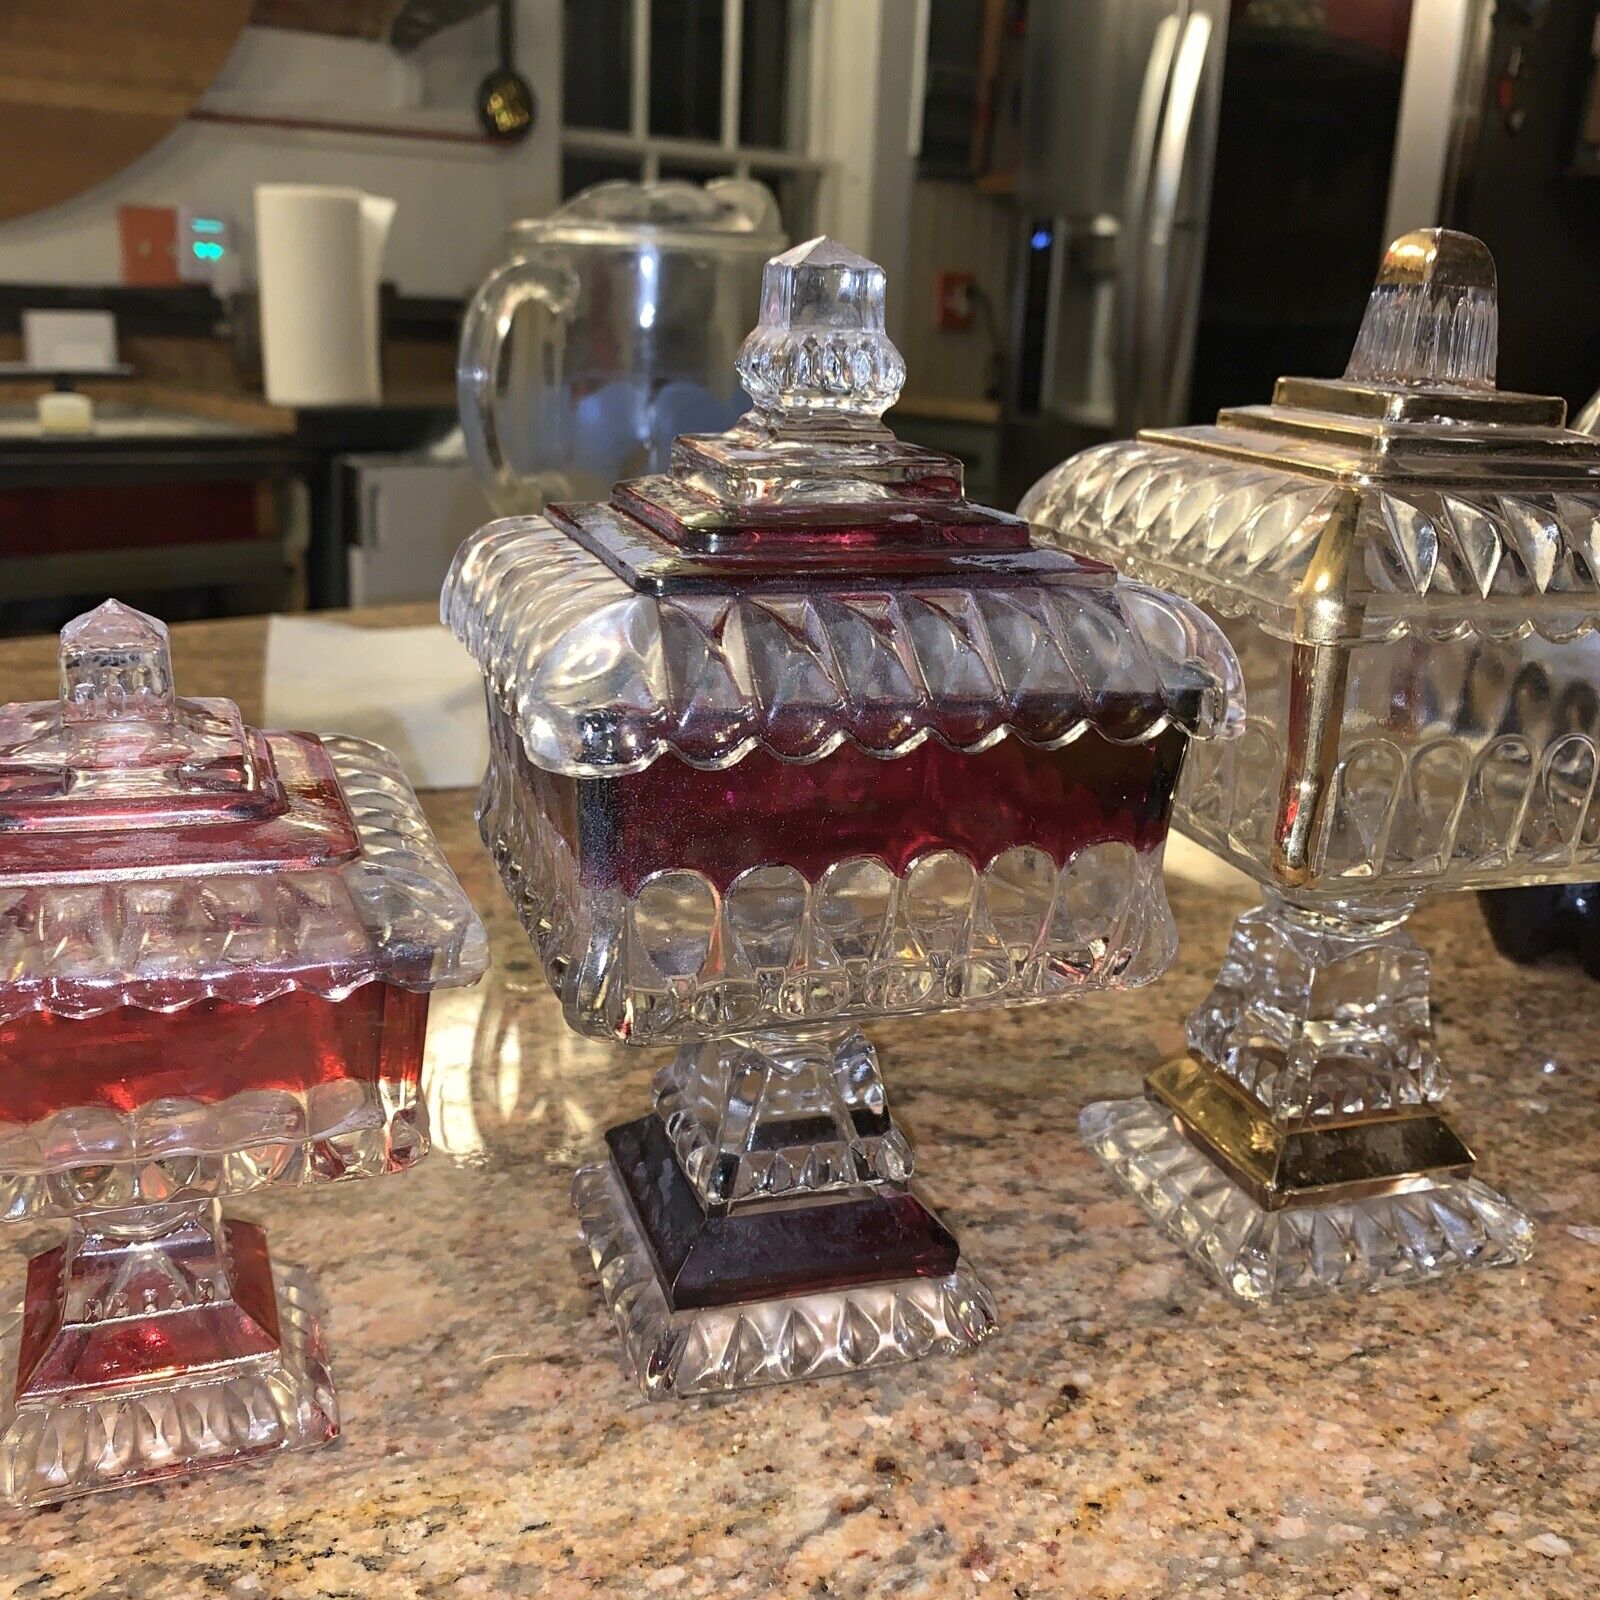 LOT SET Of 3, Largest 14k, Others Ruby REs Glass Pedestal Candy Dishes Wedding